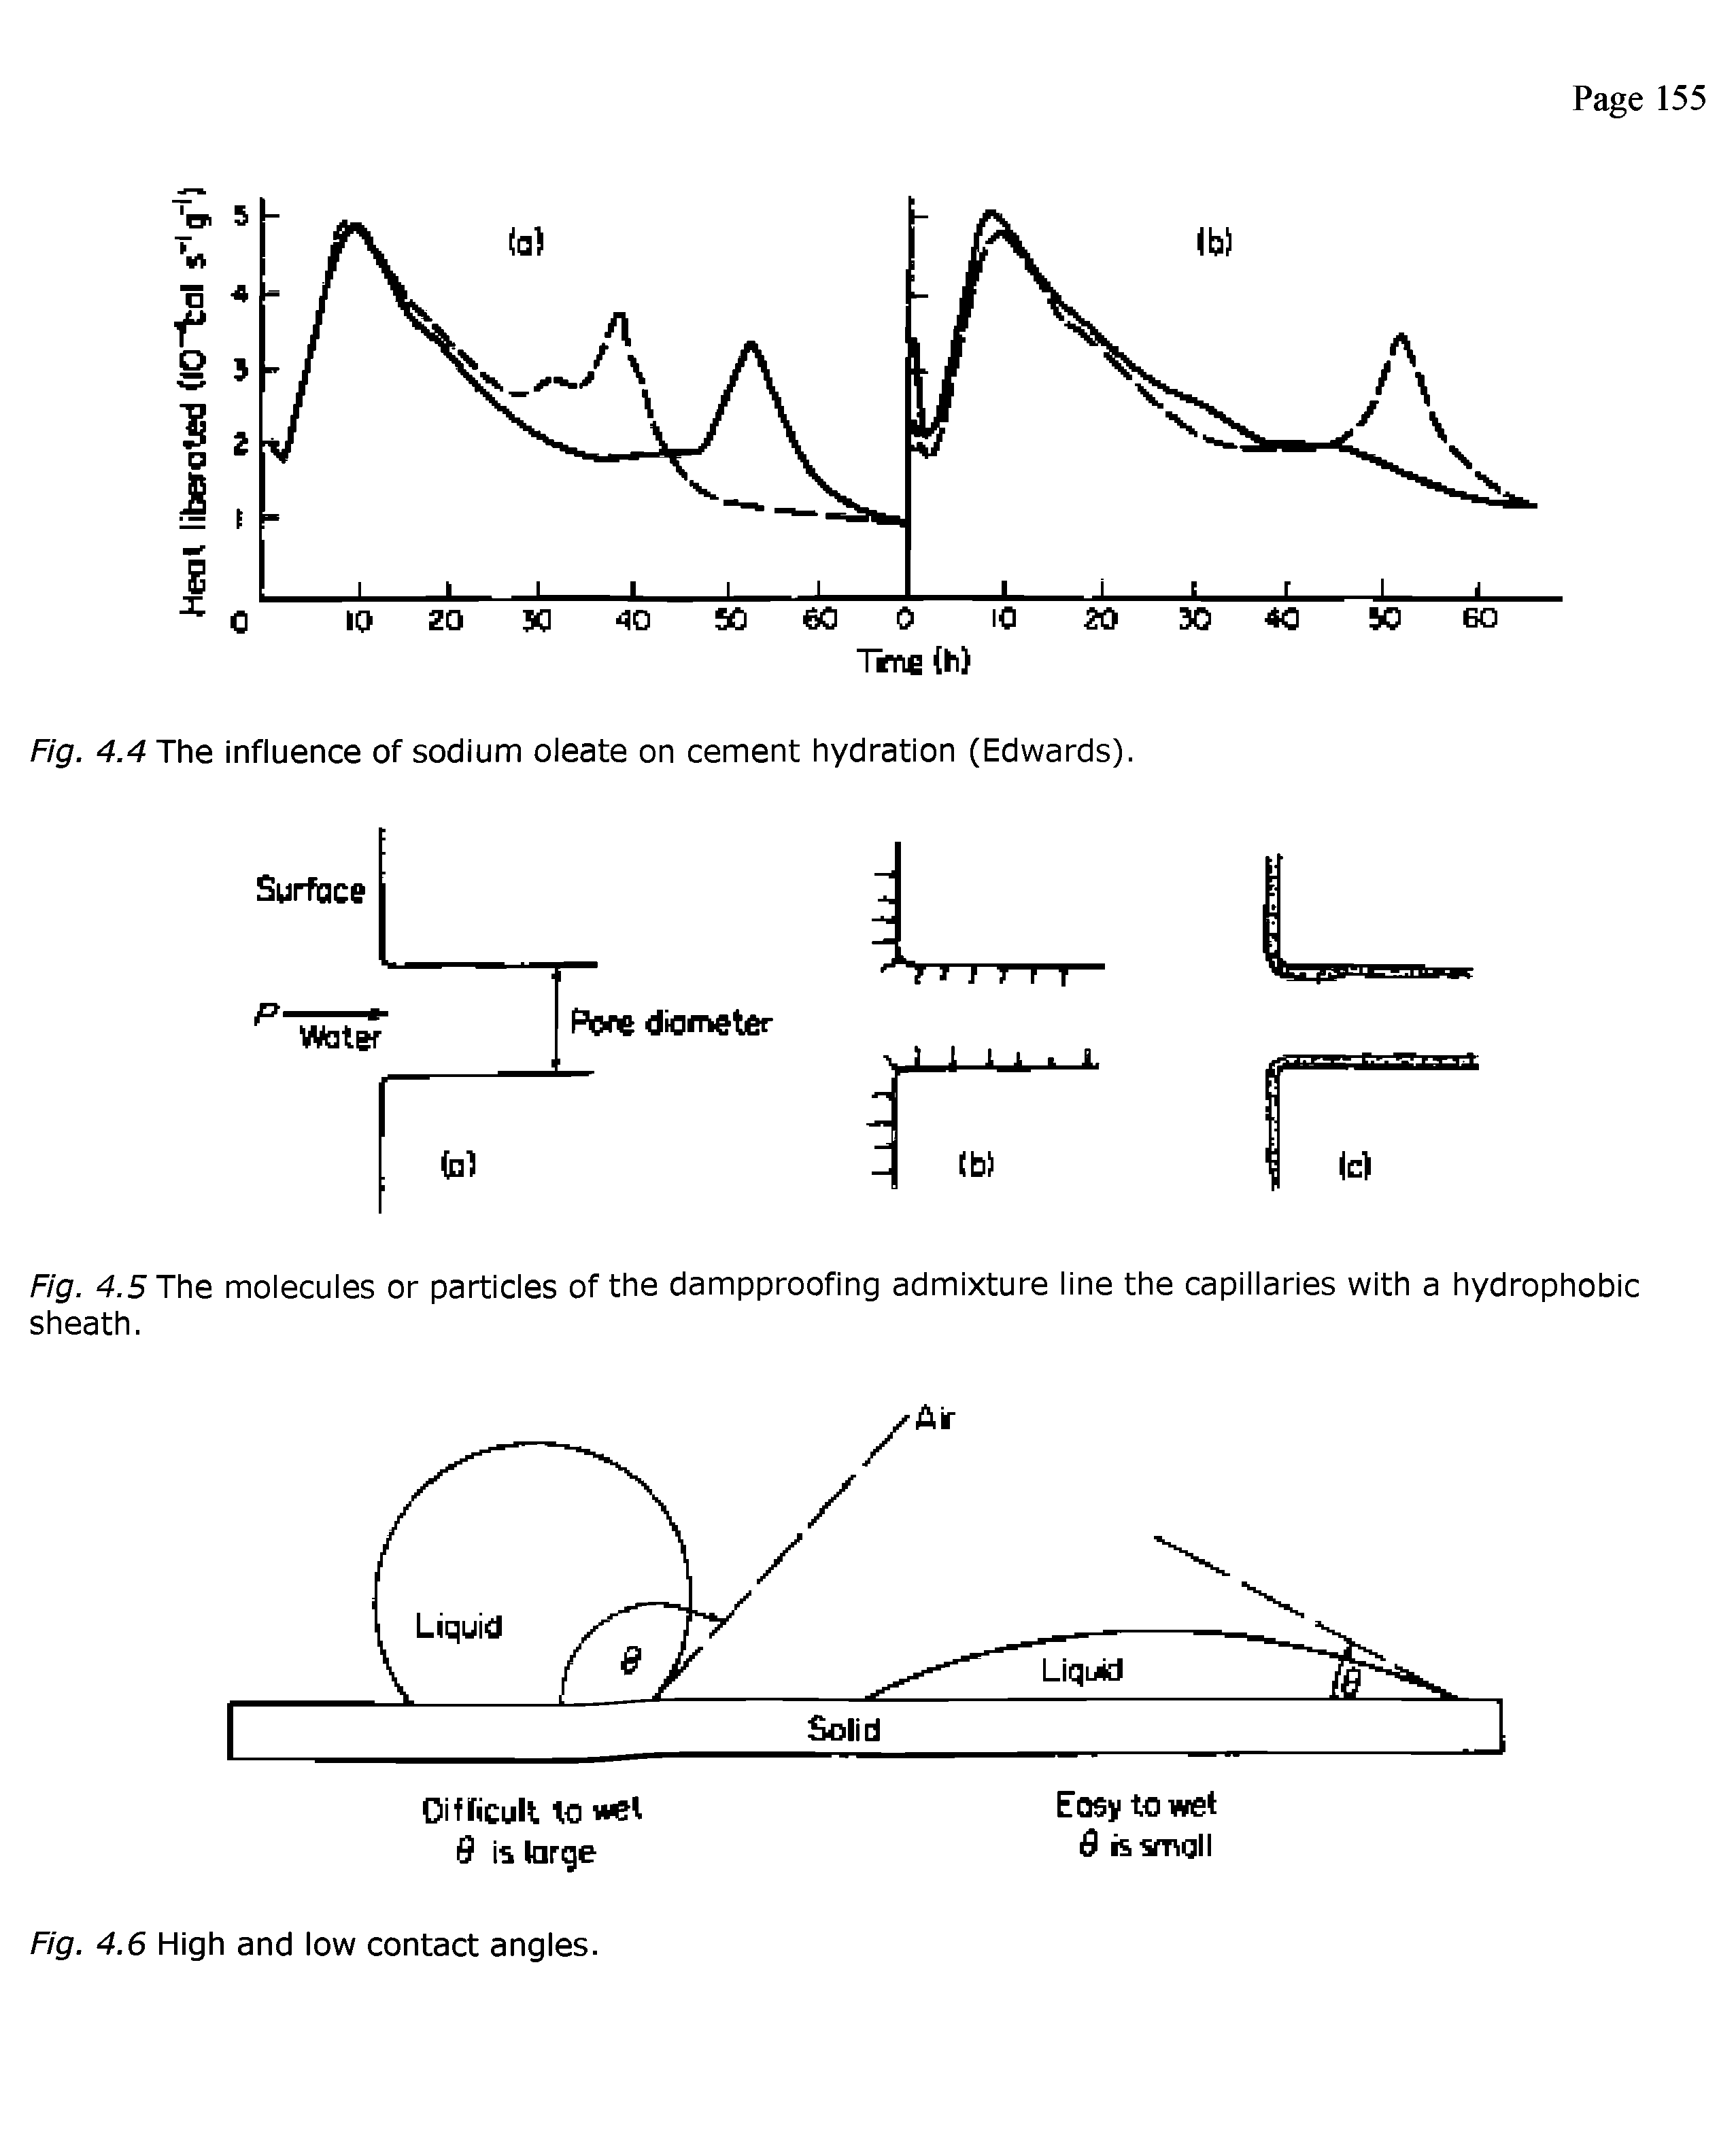 Fig. 4.4 The influence of sodium oleate on cement hydration (Edwards).